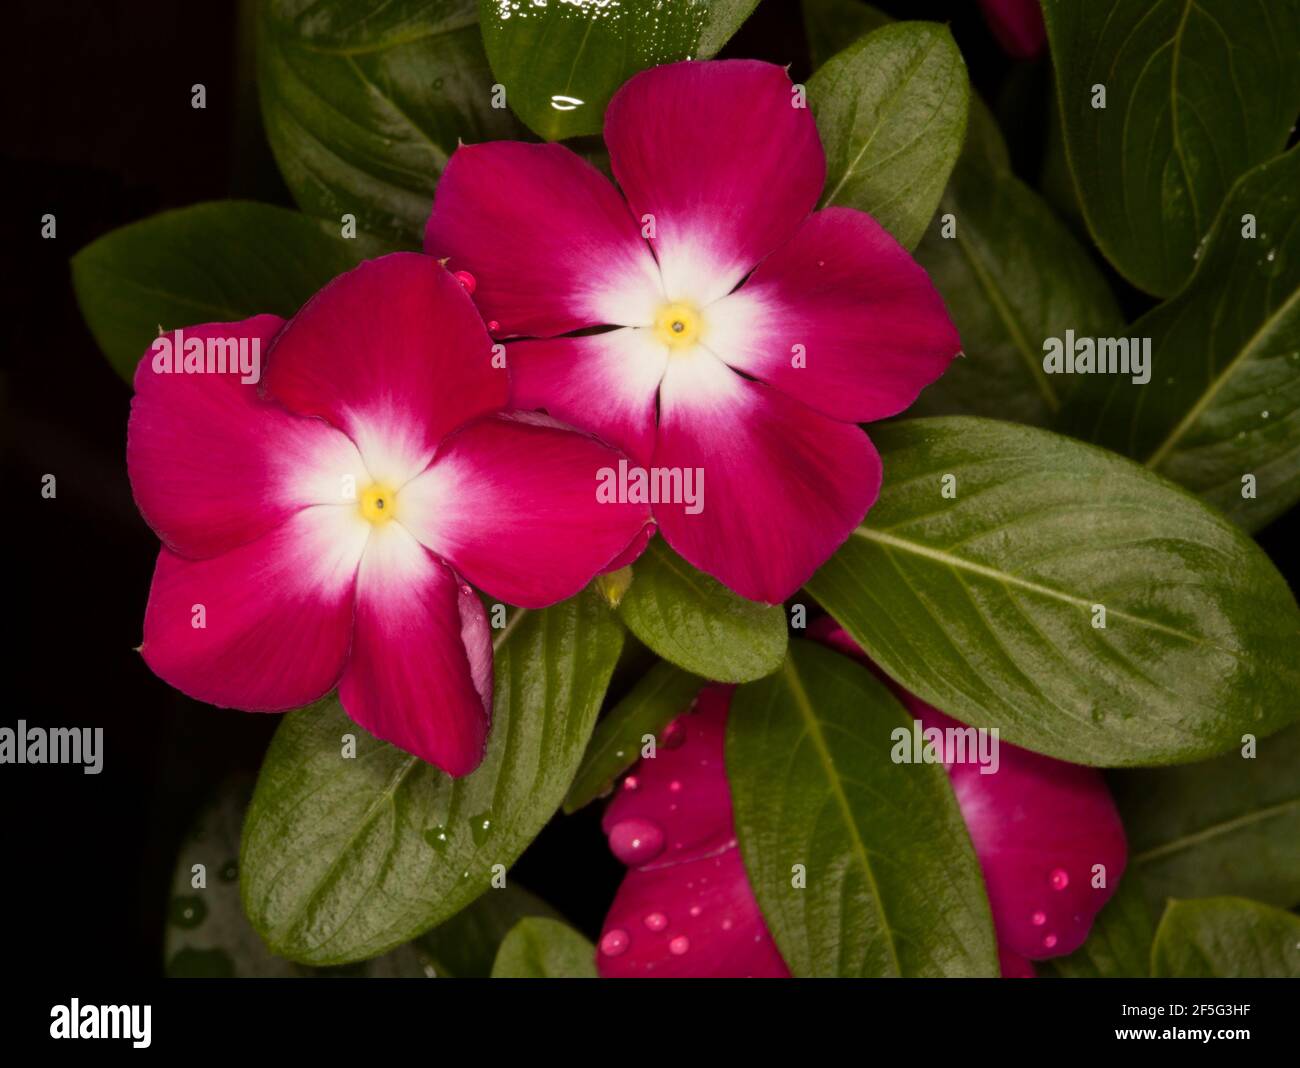 Deep red flowers with white centres of Catharanthus roseus, Vinca, drought tolerant perennial garden plant, on background of emerald green foliage Stock Photo